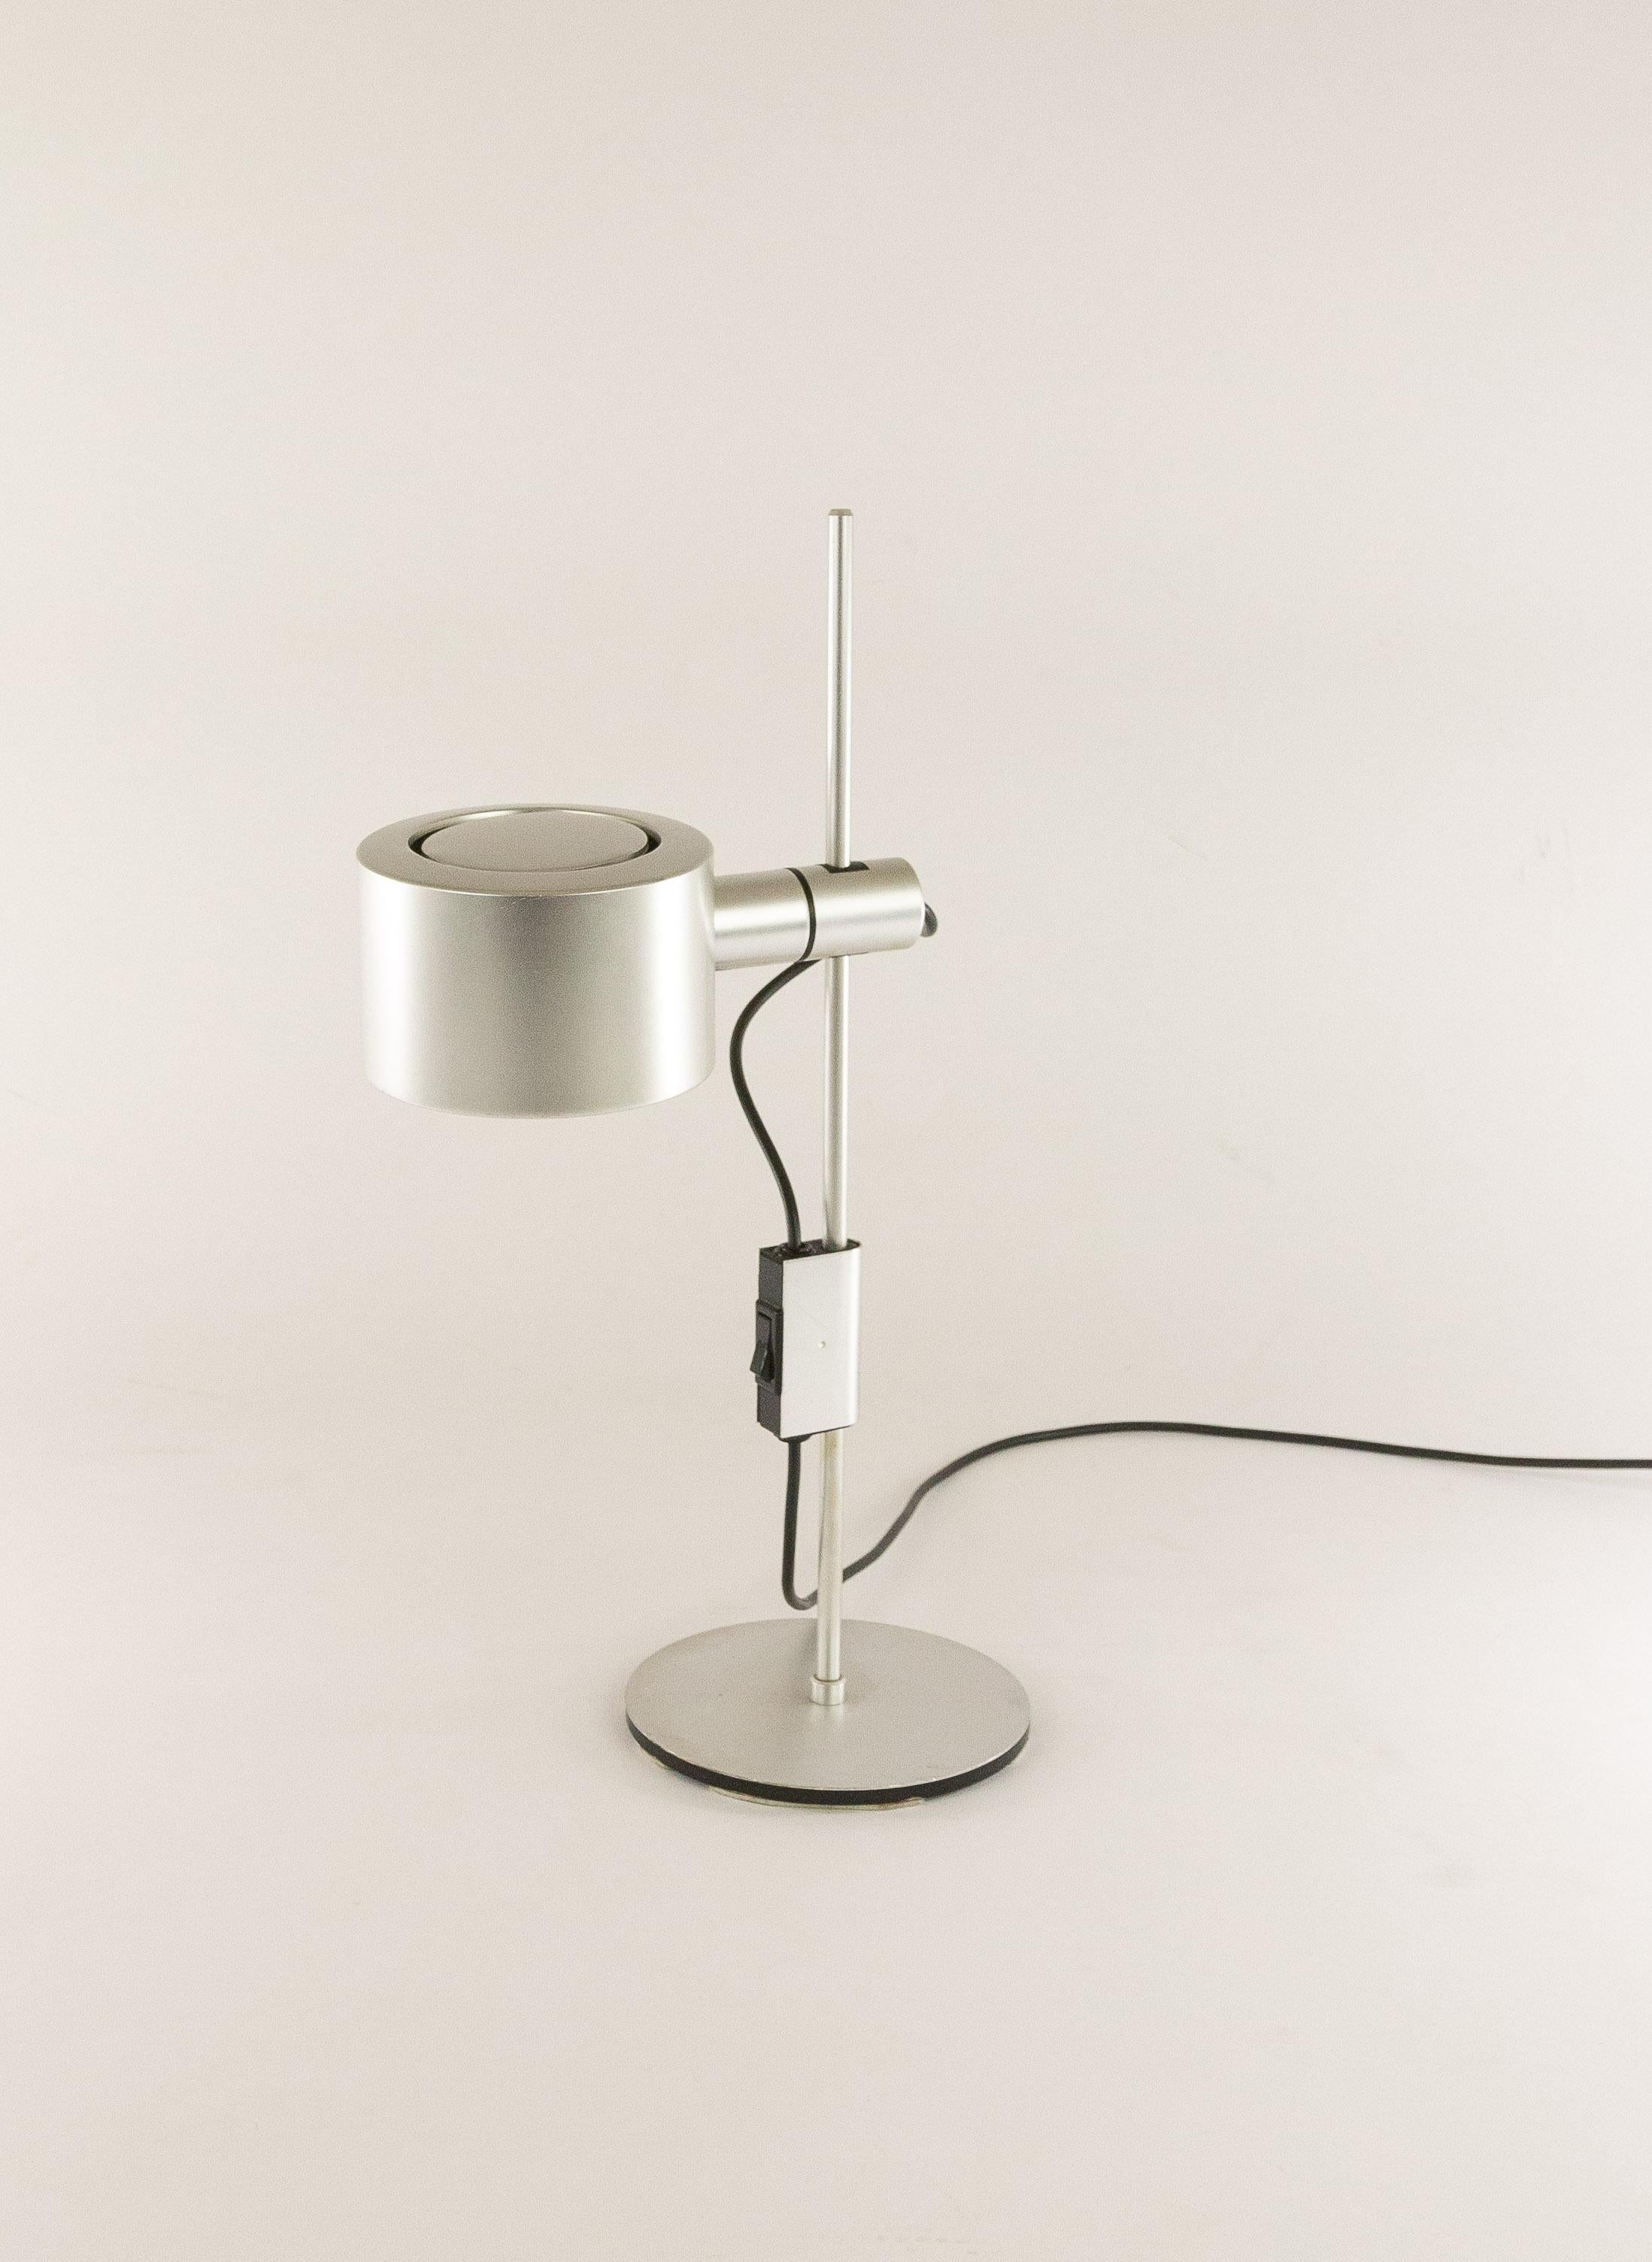 Aluminum desk lamp by Ronald Homes for Conelight Limited. The shade of the lamp is adjustable in height and rotatable.

The lamp is in very good condition considering its age and the material used.

This model is regularly wrongly attributed to